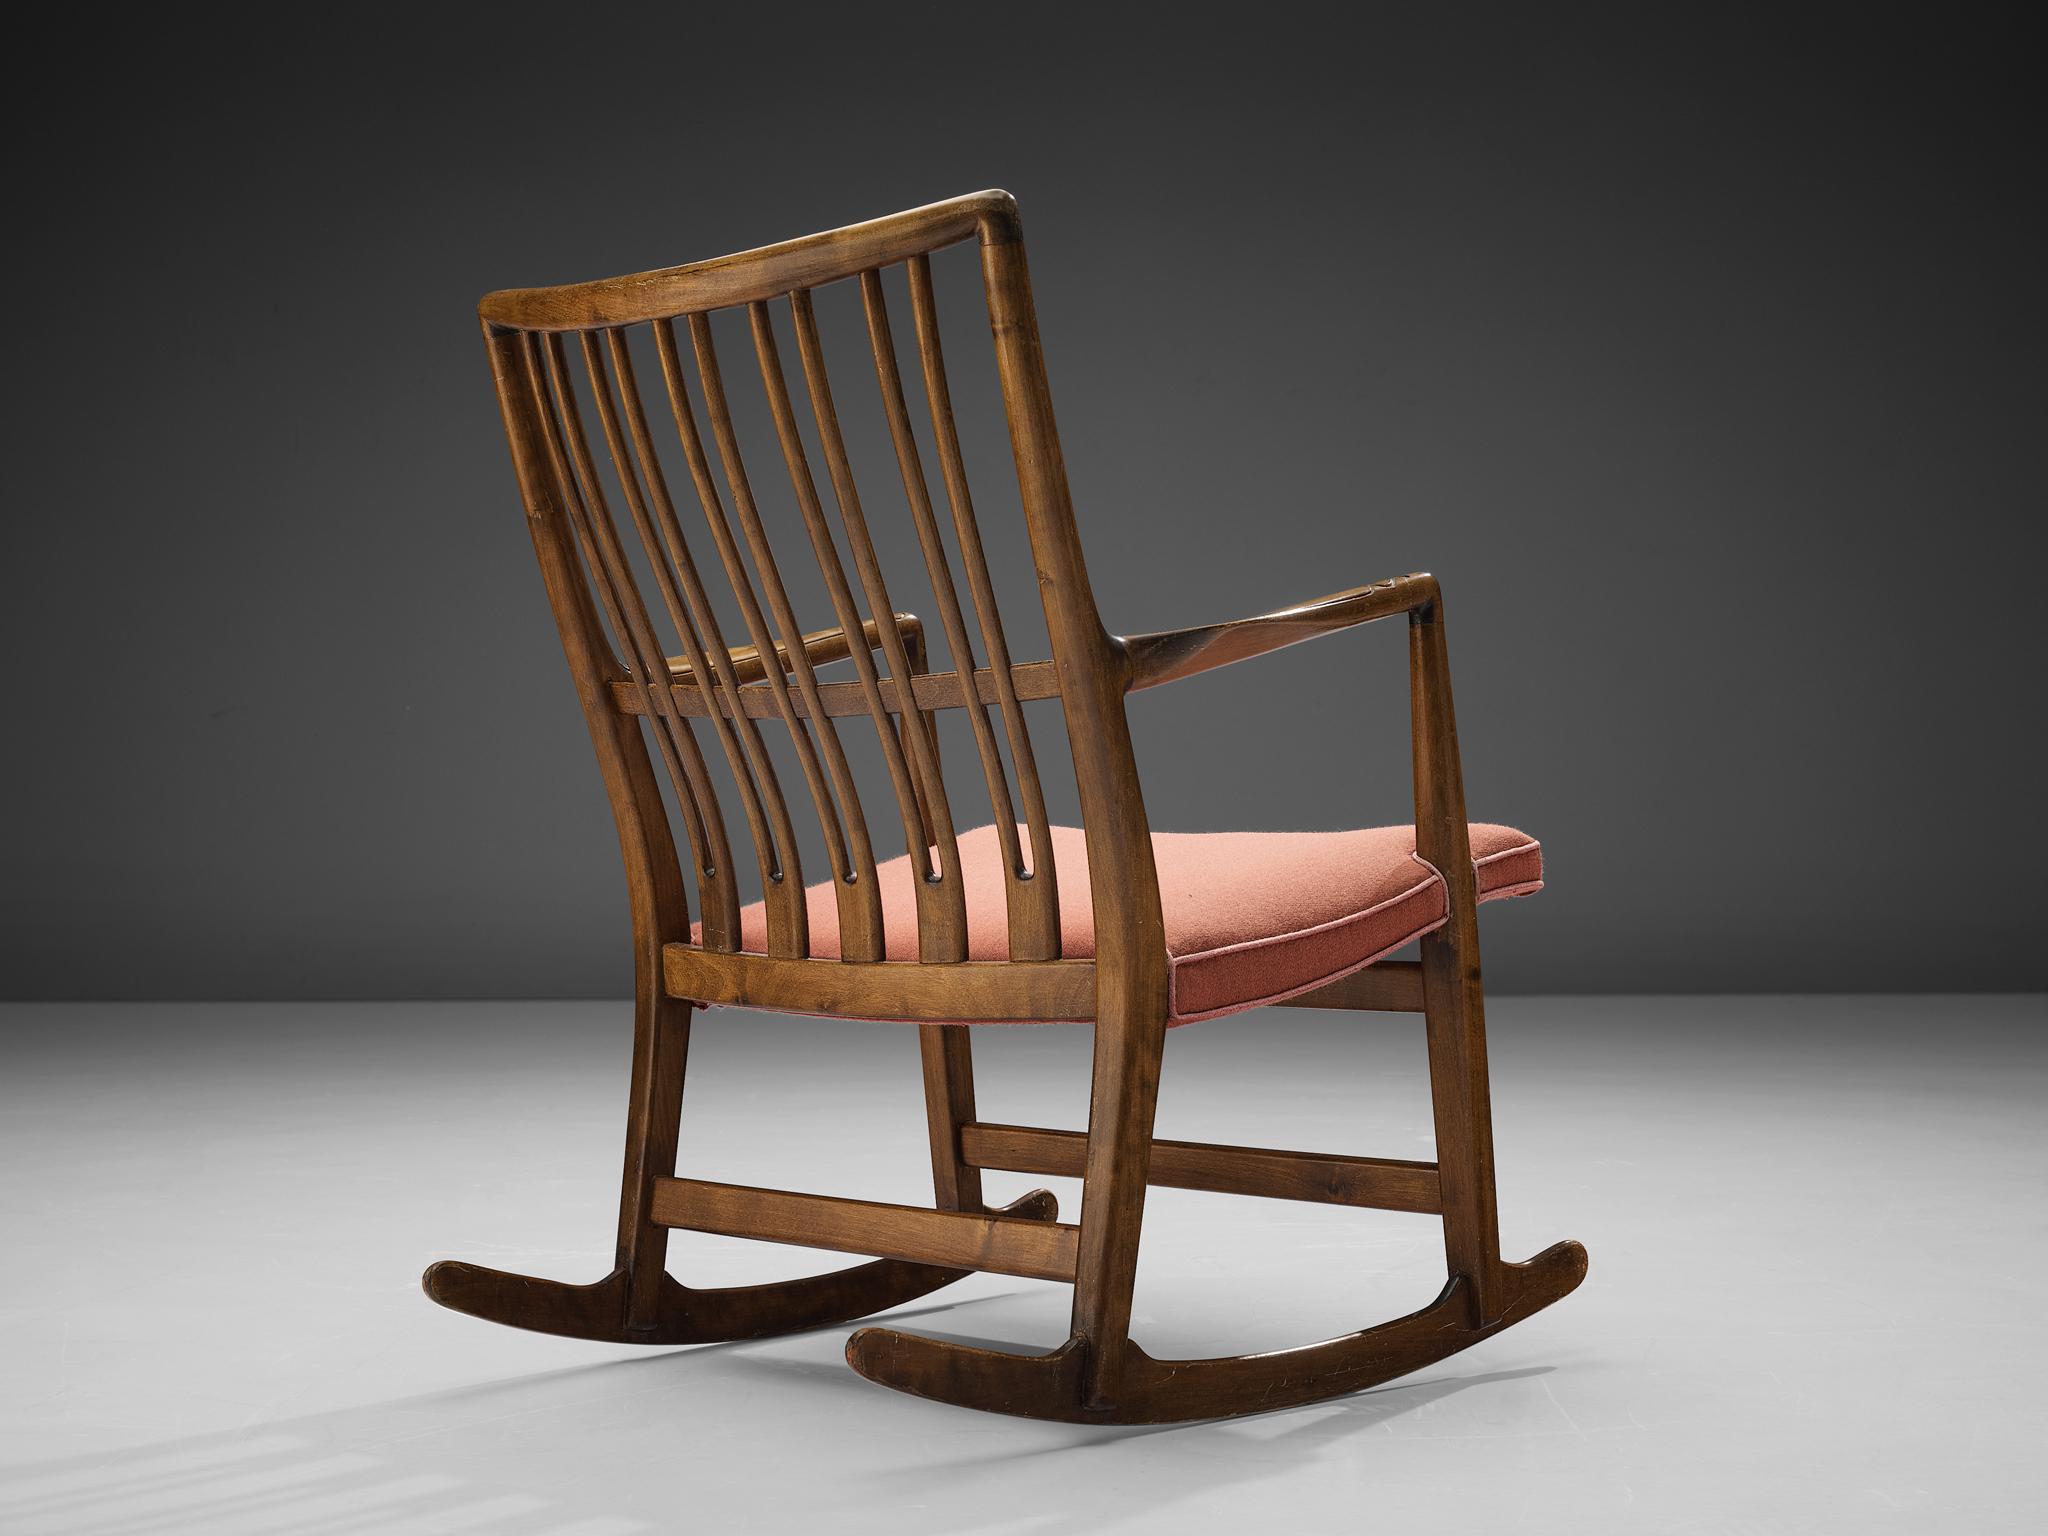 Hans J. Wegner for Mikael Laursen, rocking chair model ML-33, stained beech, fabric Denmark, 1940s.

This rocking chair is an early design of Hans Wegner, produced by master-carver and cabinetmaker Mikael Laursen. Model ML-33 is known as the first